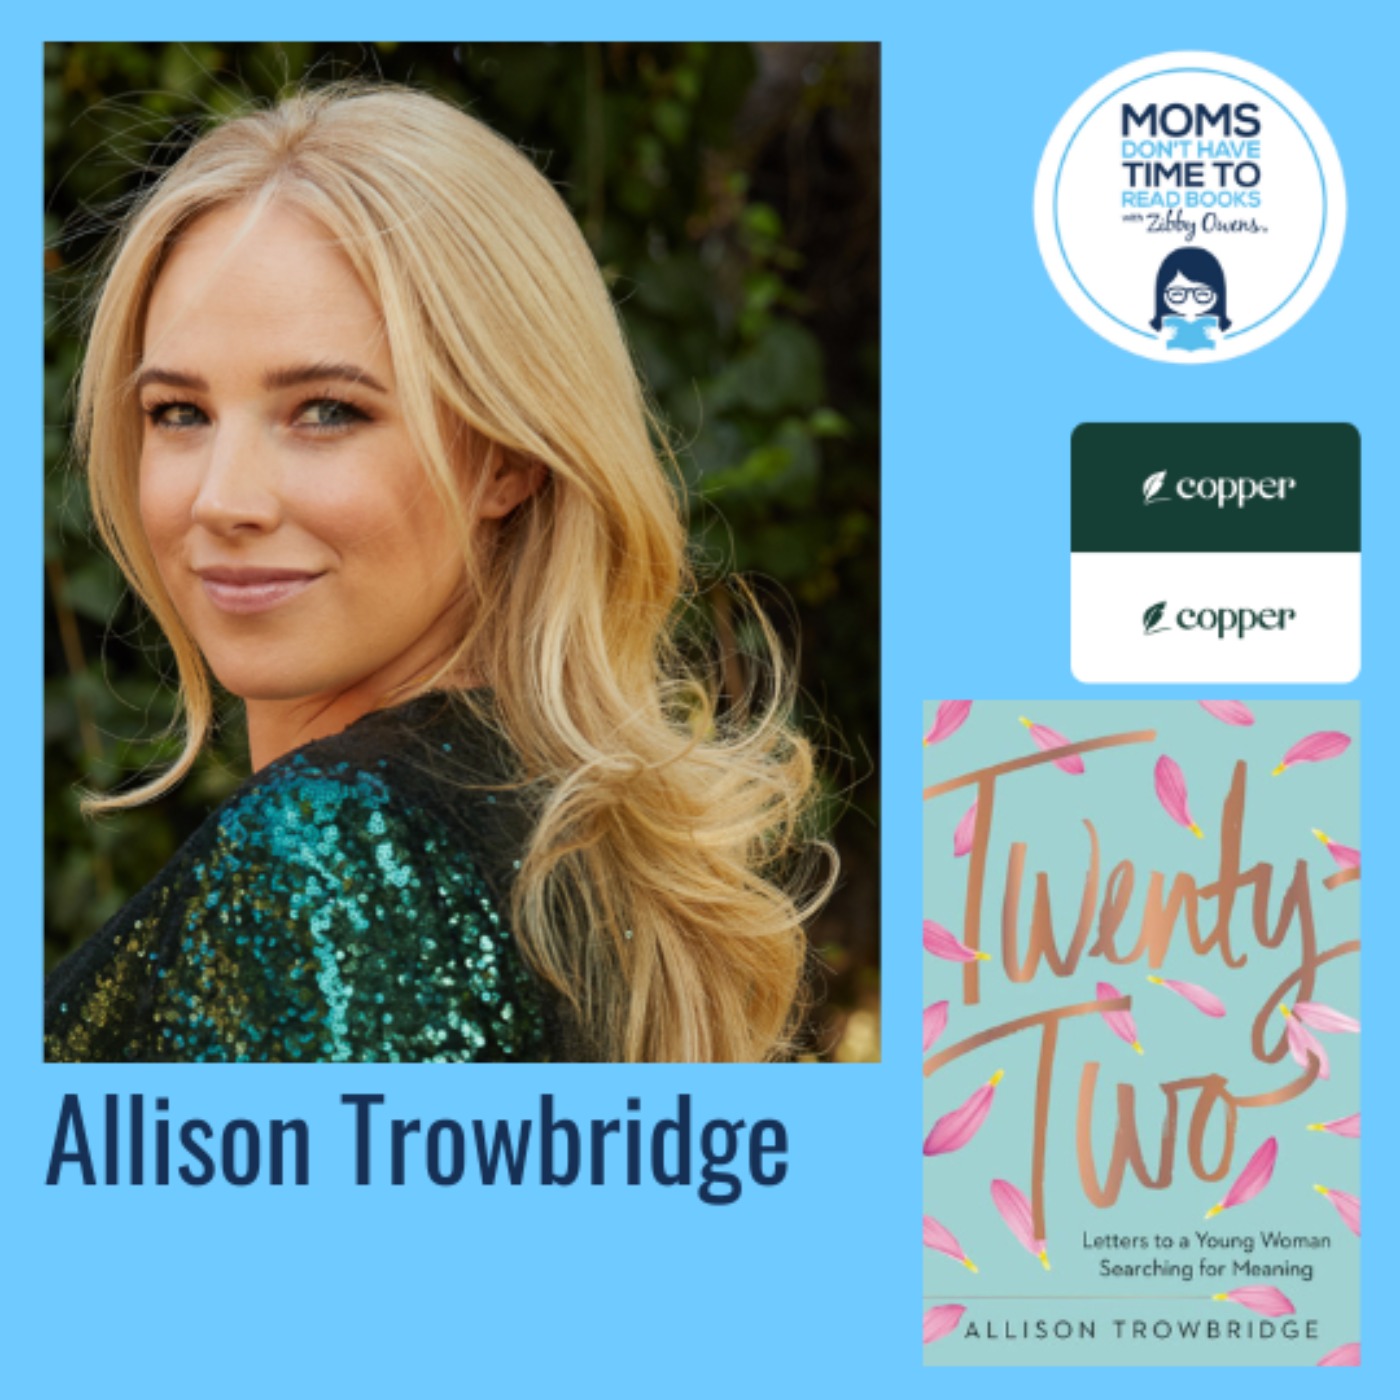 Allison Trowbridge, TWENTY-TWO: Letters to a Young Woman Searching for Meaning